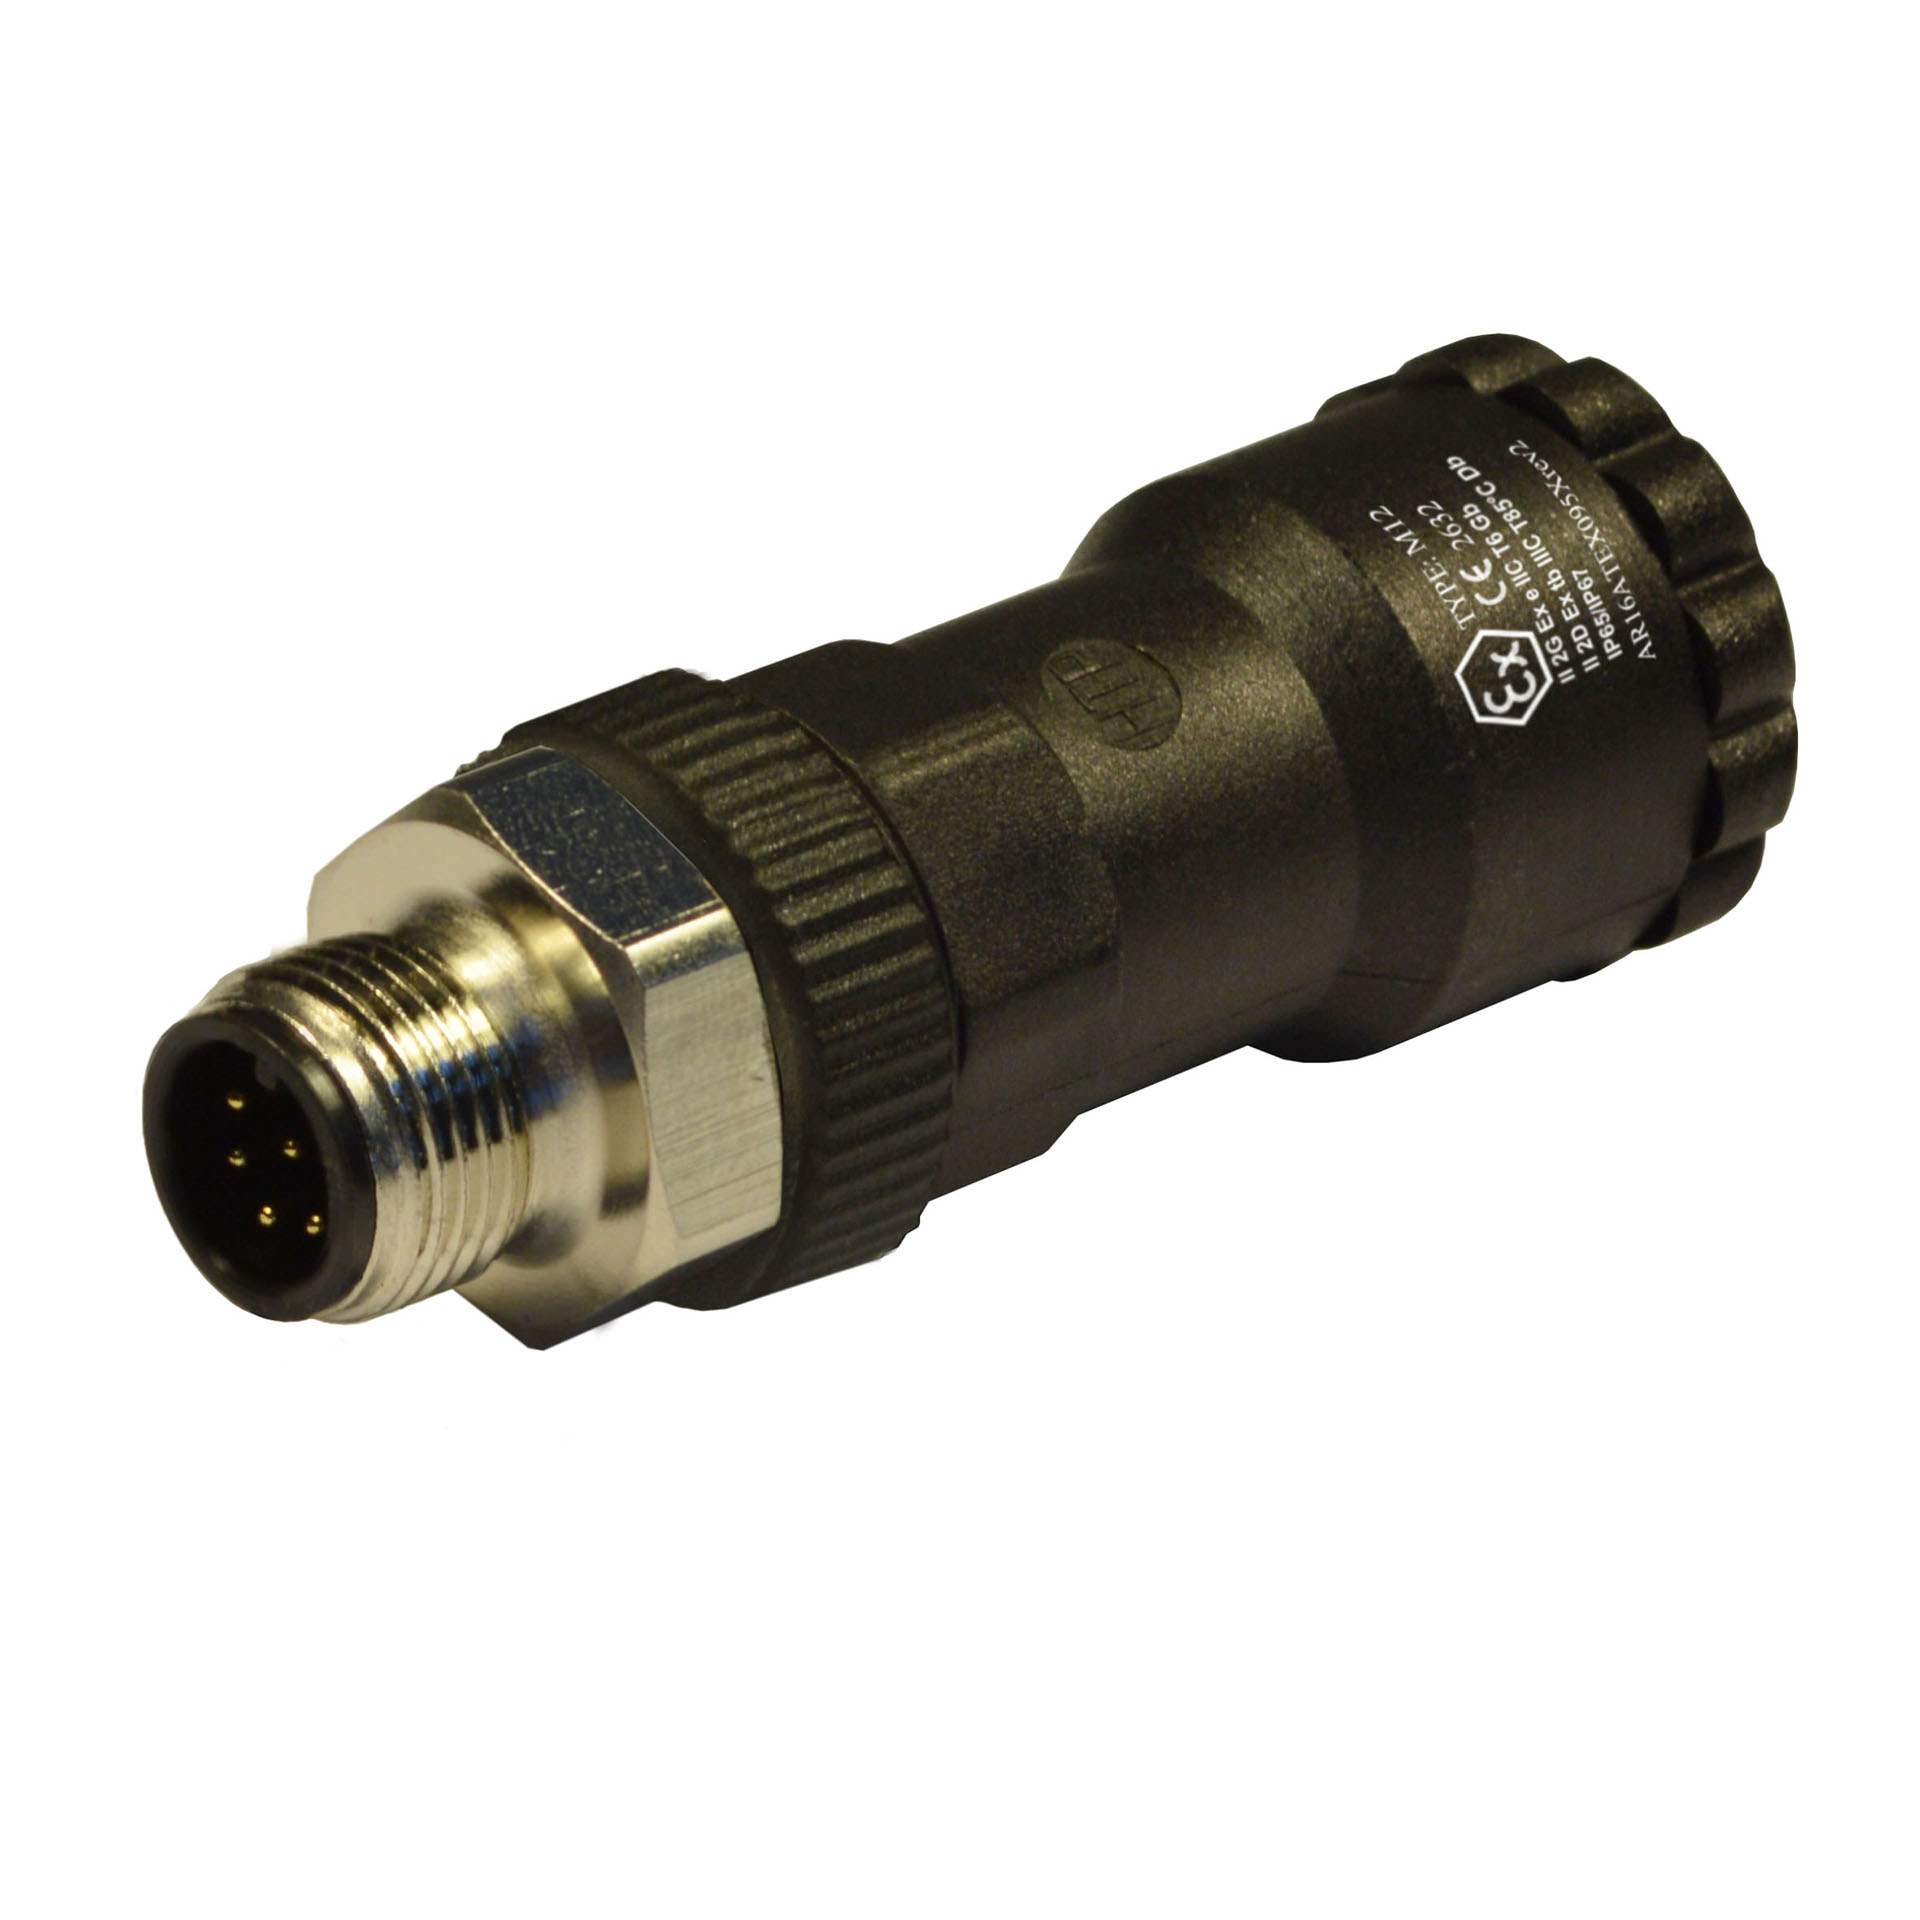 M12 field attachable,male,180°,8p.,PG9/11unif.or double exit cable,ATEX conform